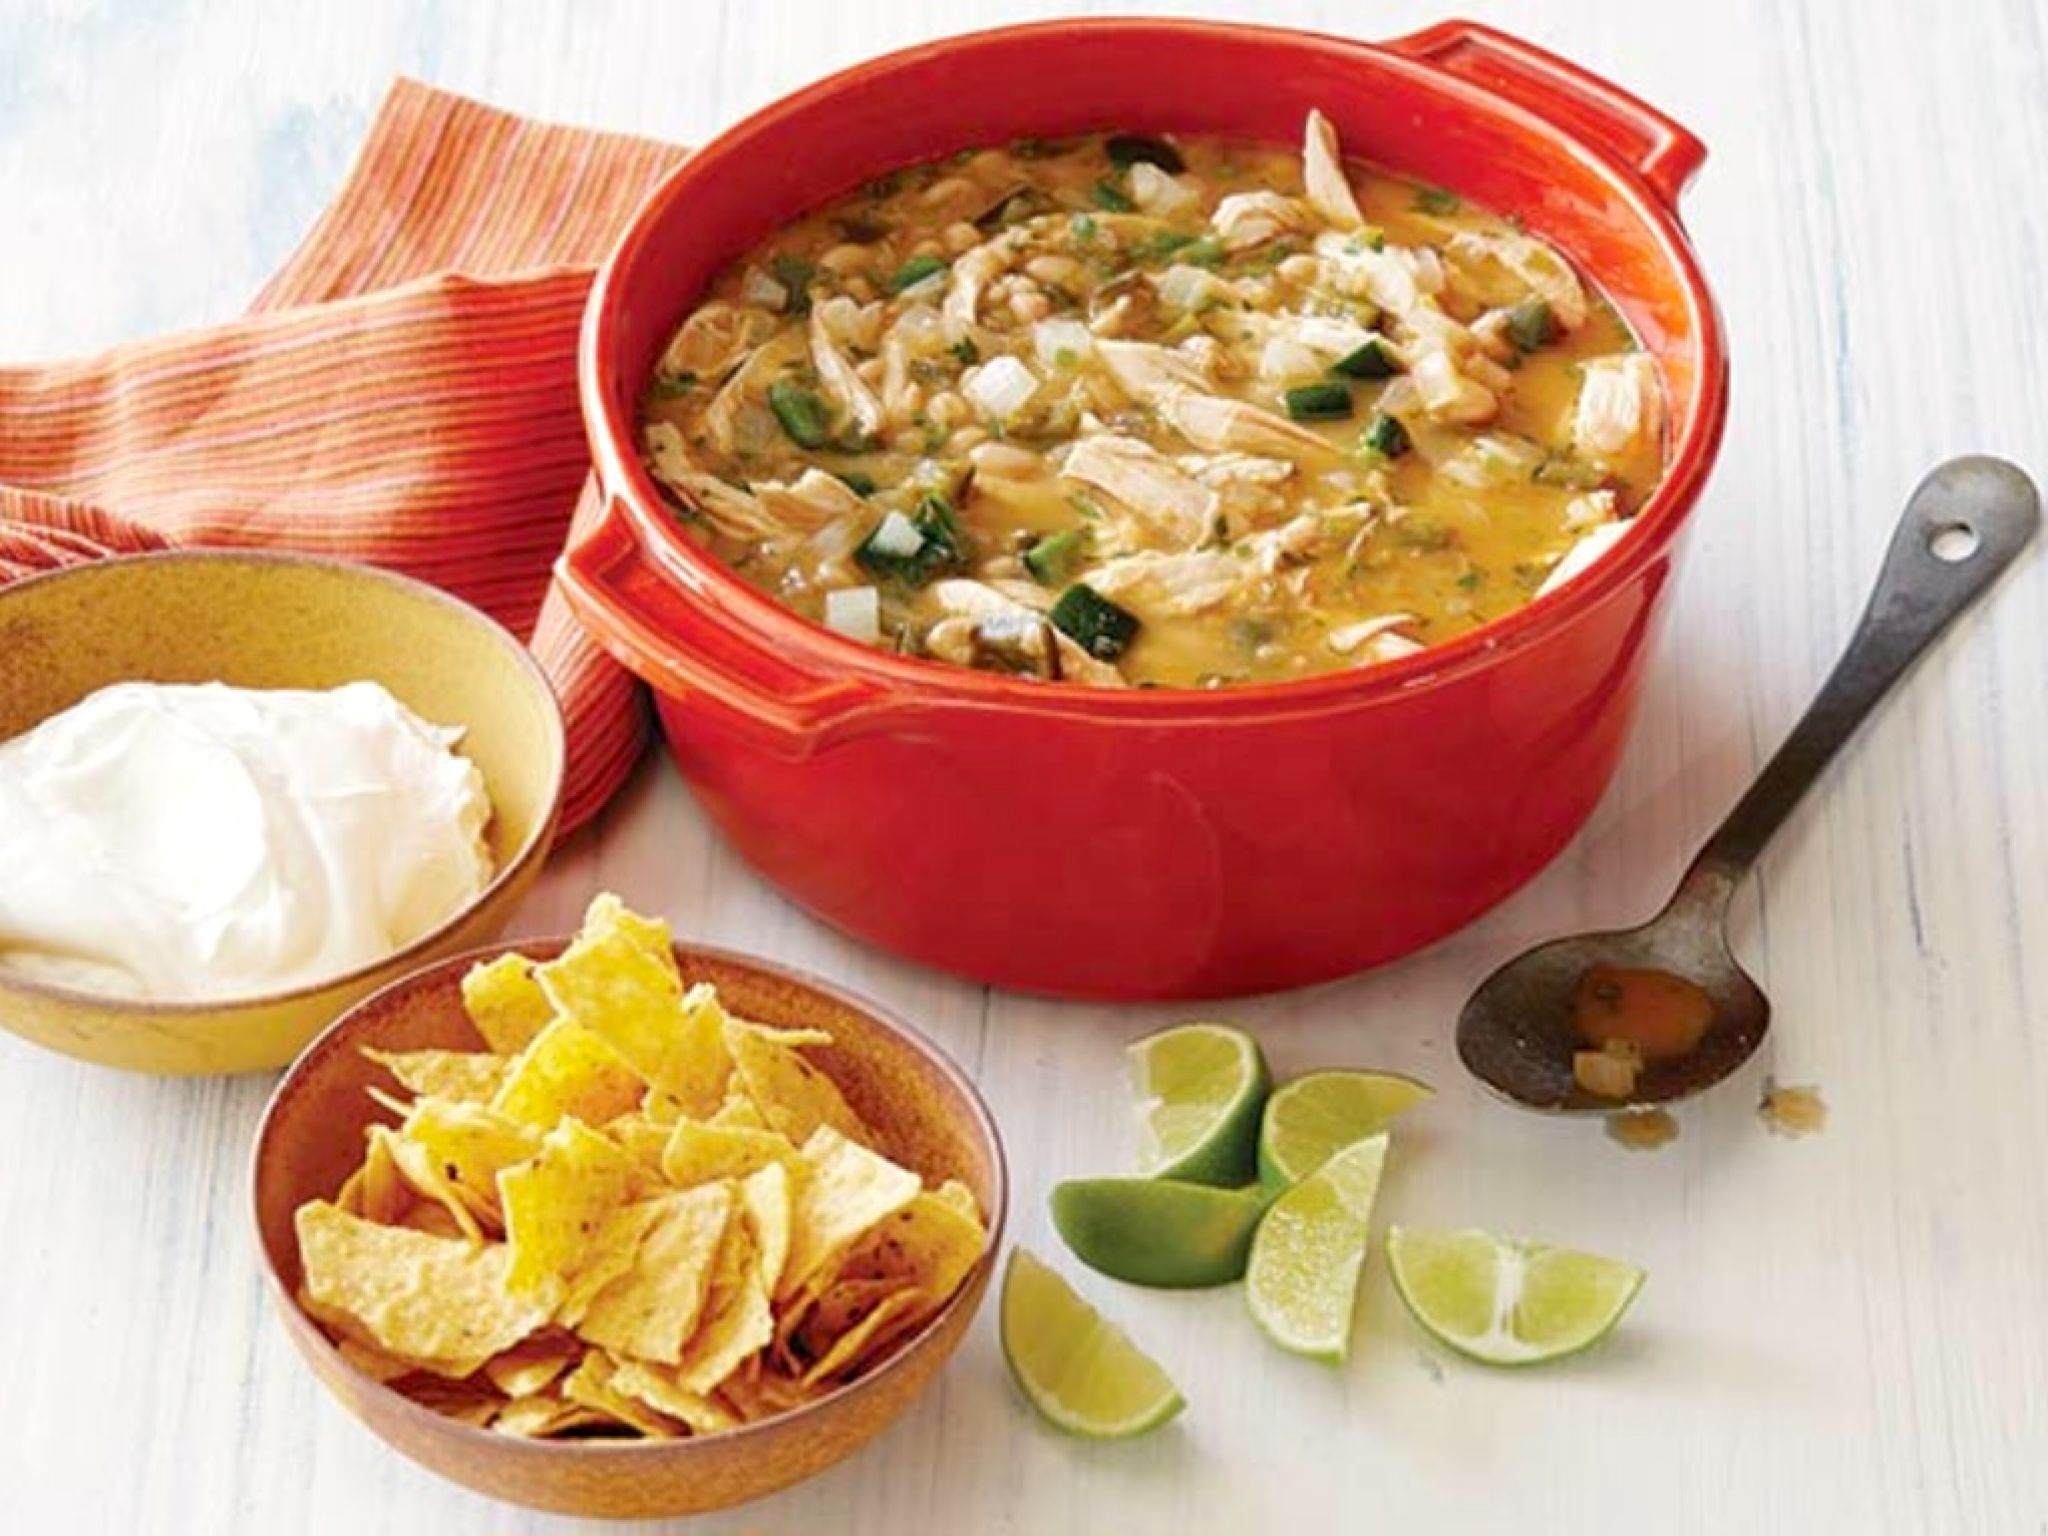 My favorite Healthy Mexican Chicken Chili Recipe is super fast to prep and full of flavor. Originally inspired by Dave Lieberman's Mexican Chicken Stew, I've made it even better!